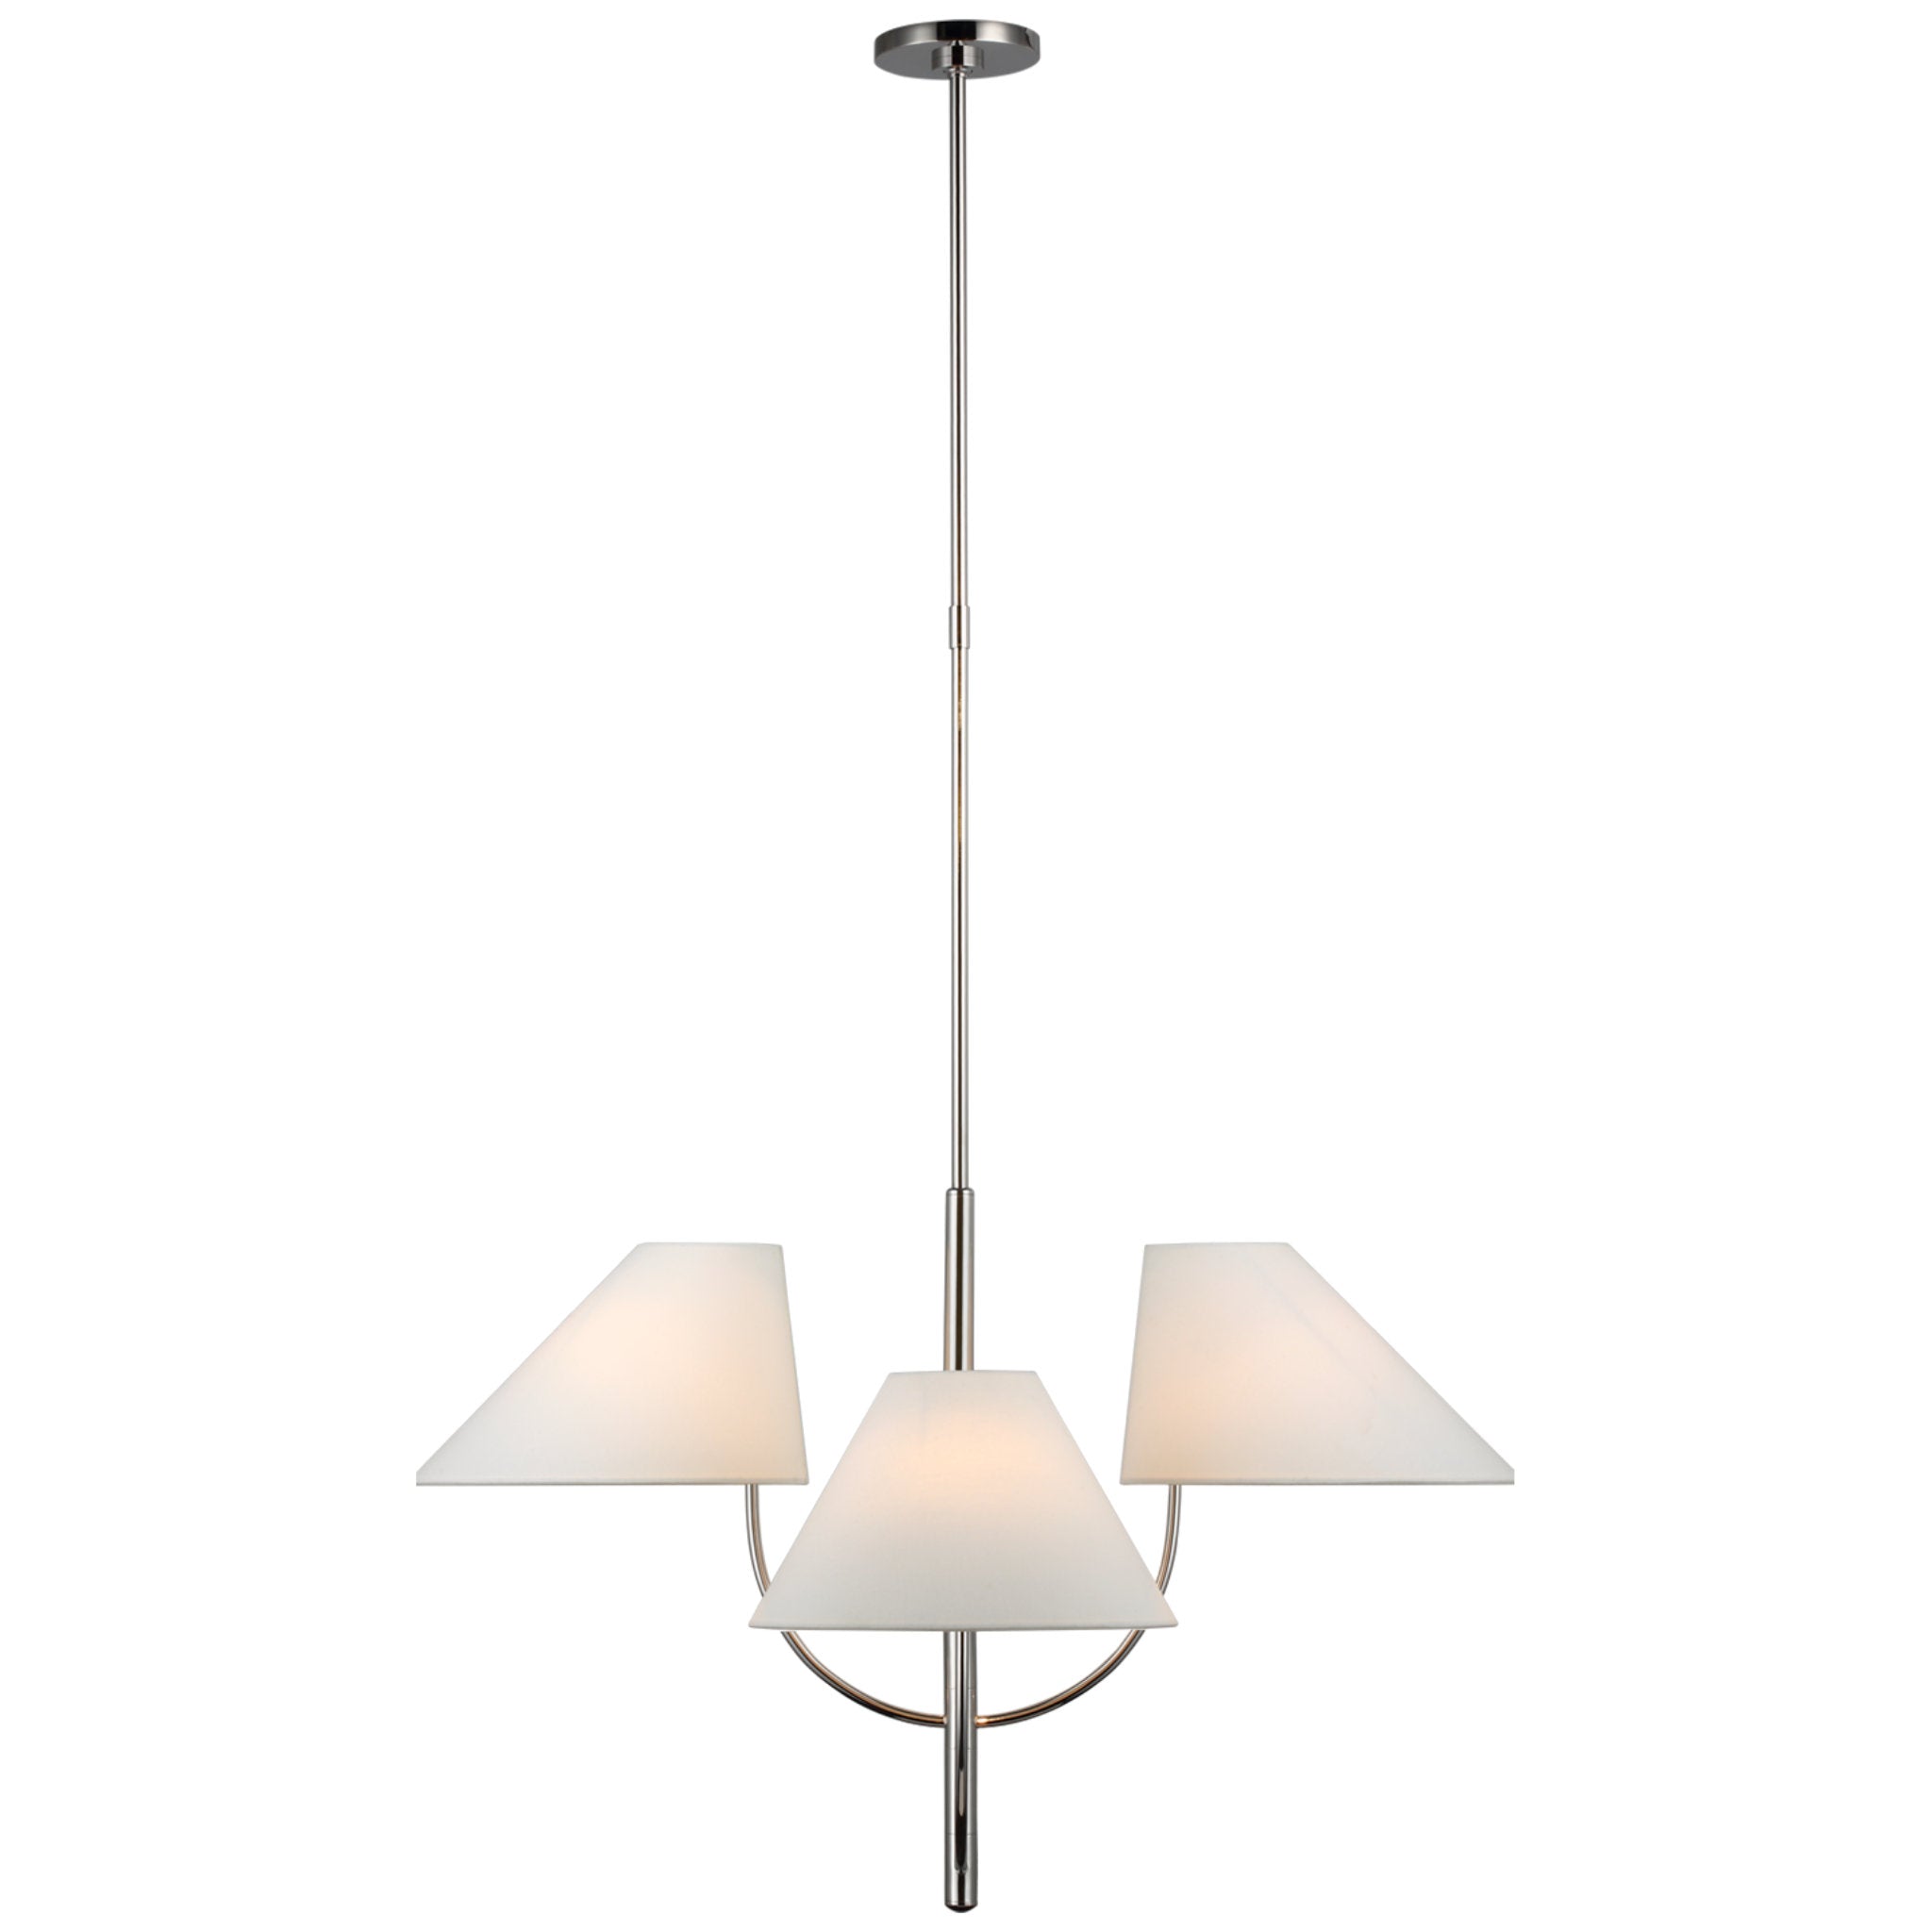 kate spade new york Kinsley Large One-Tier Chandelier in Polished Nickel with Linen Shades